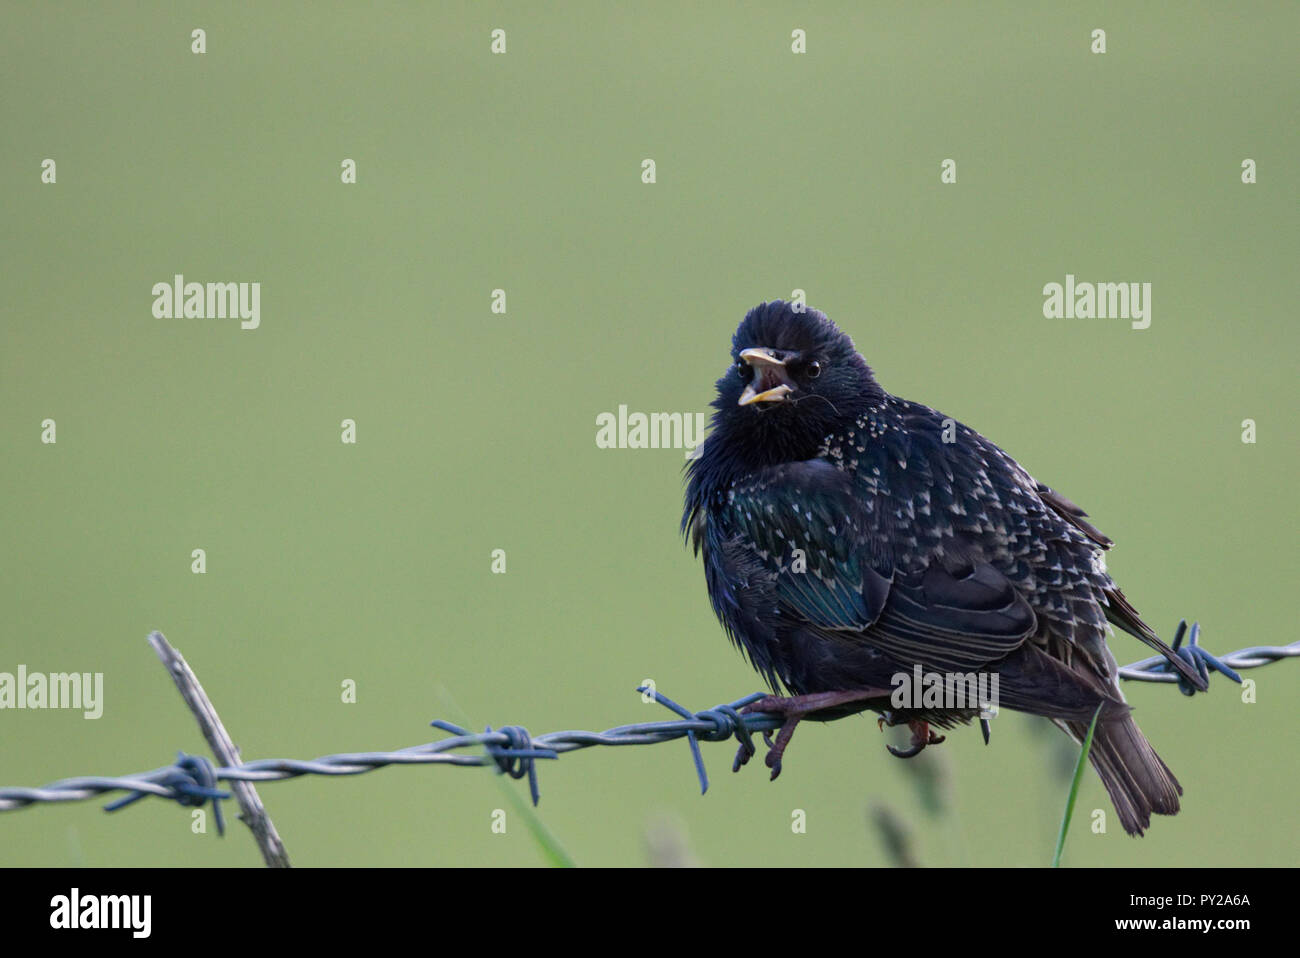 Starling sitting on a fence squawking Stock Photo